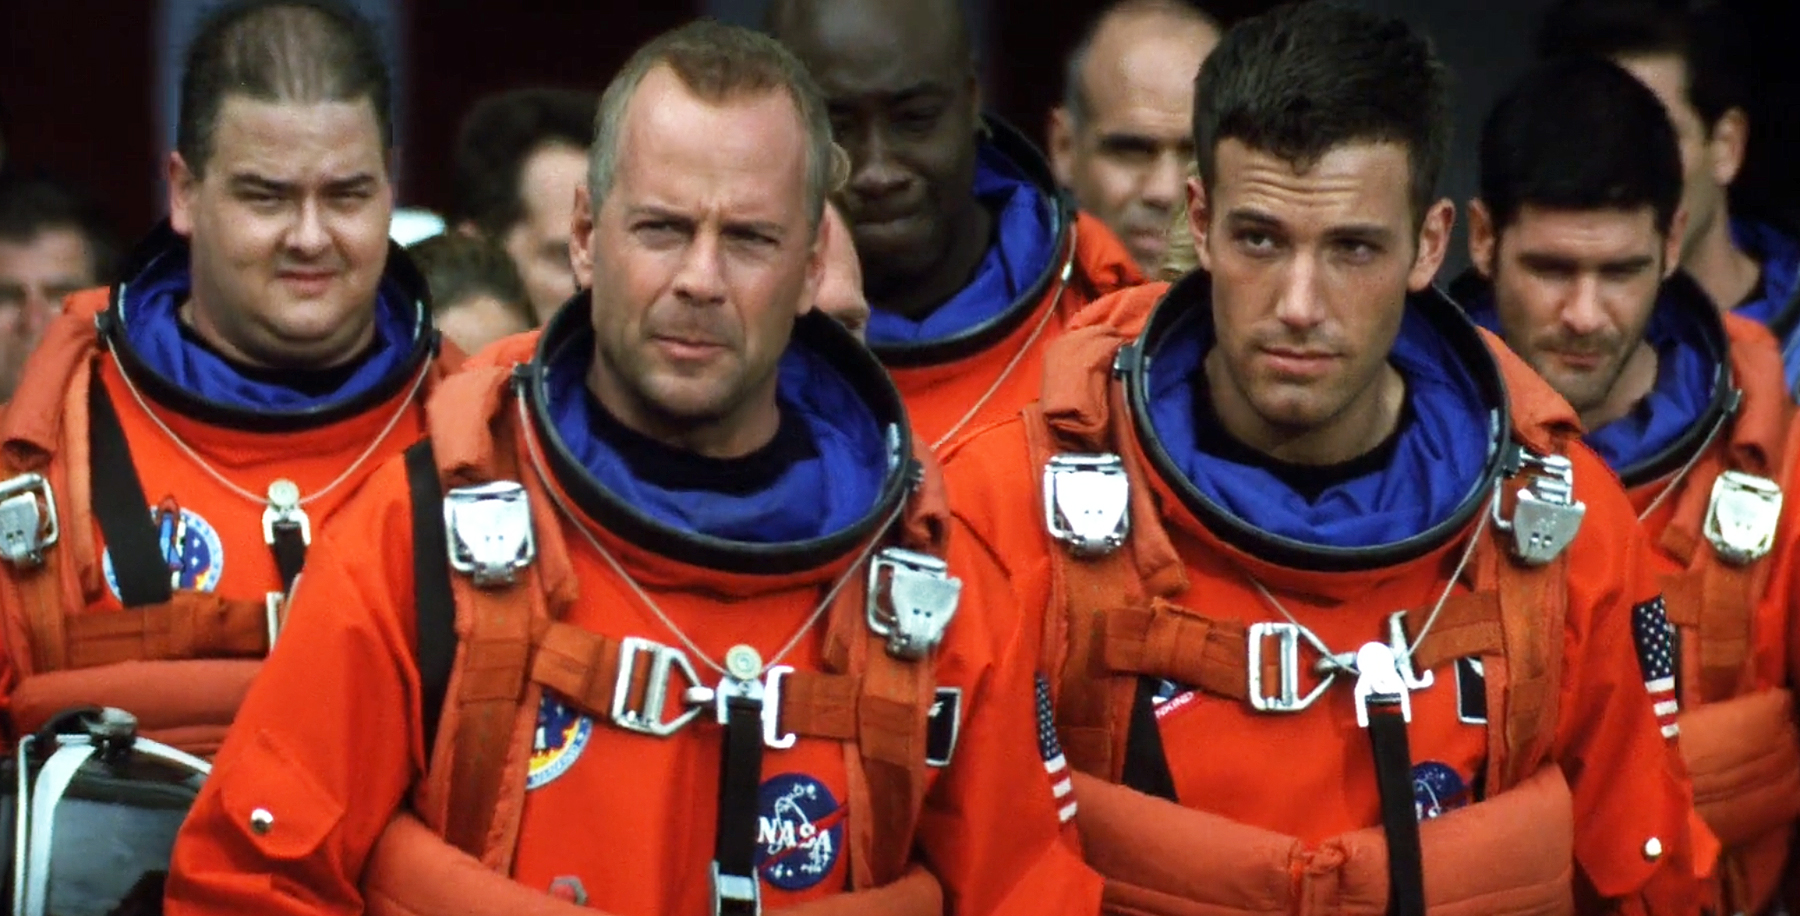 group of astronauts from the movie armageddon